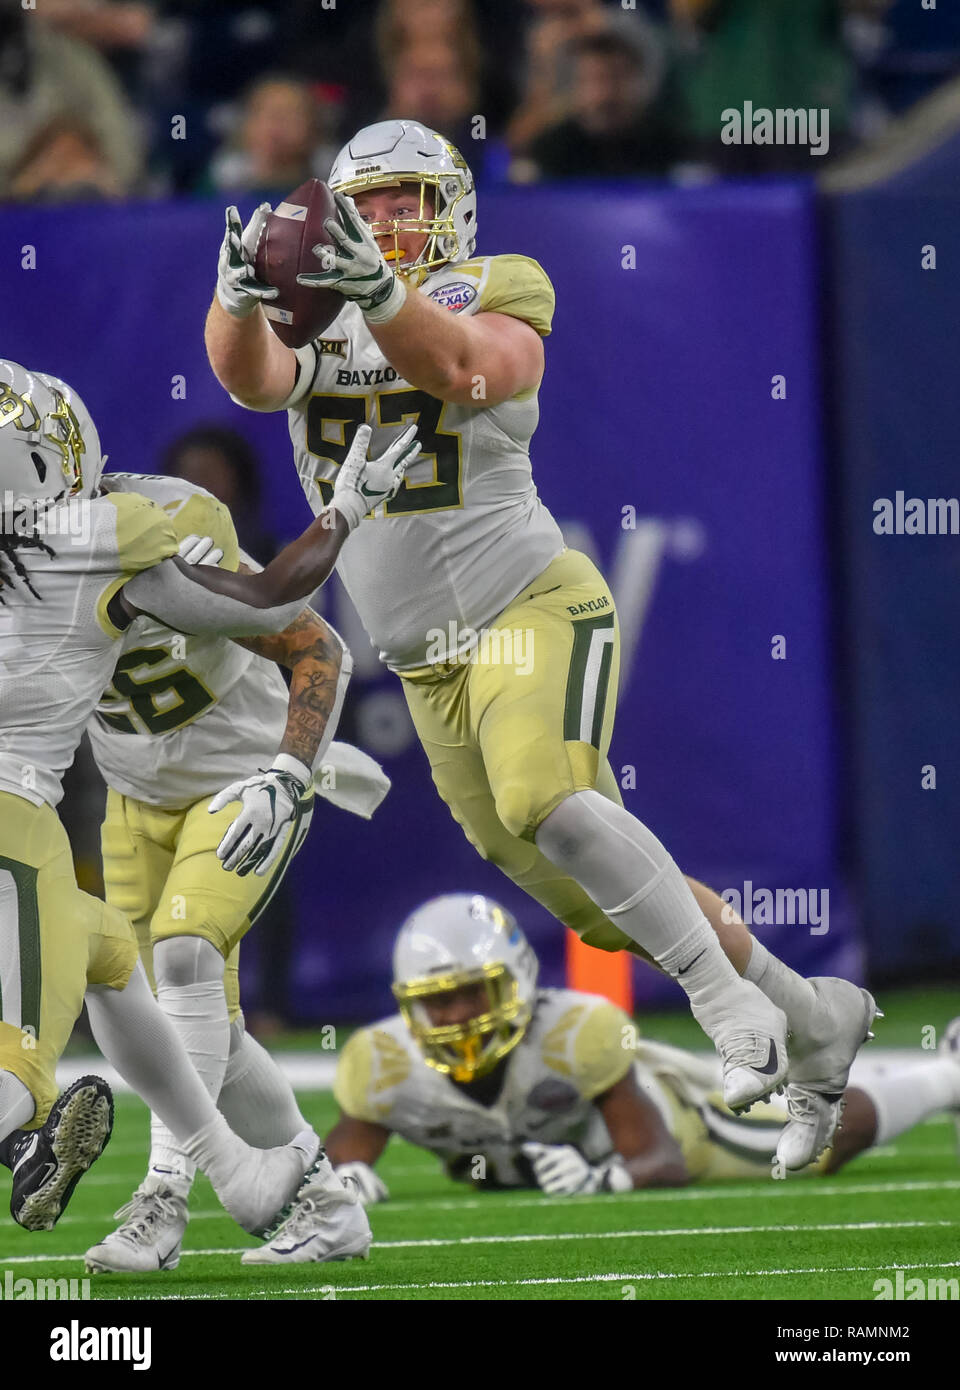 December 27, 2018 Houston, TX...Baylor Bear lineman, James Lynch (93) , in action at the NCAA football Academy Sports and Outdoors Texas Bowl game between the Baylor Bears and the Vanderbilt Commodores at NRG Stadium in Houston, TX. (Absolute Complete Photographer & Company Credit: Joe Calomeni / MarinMedia.org / Cal Sport Media) Stock Photo